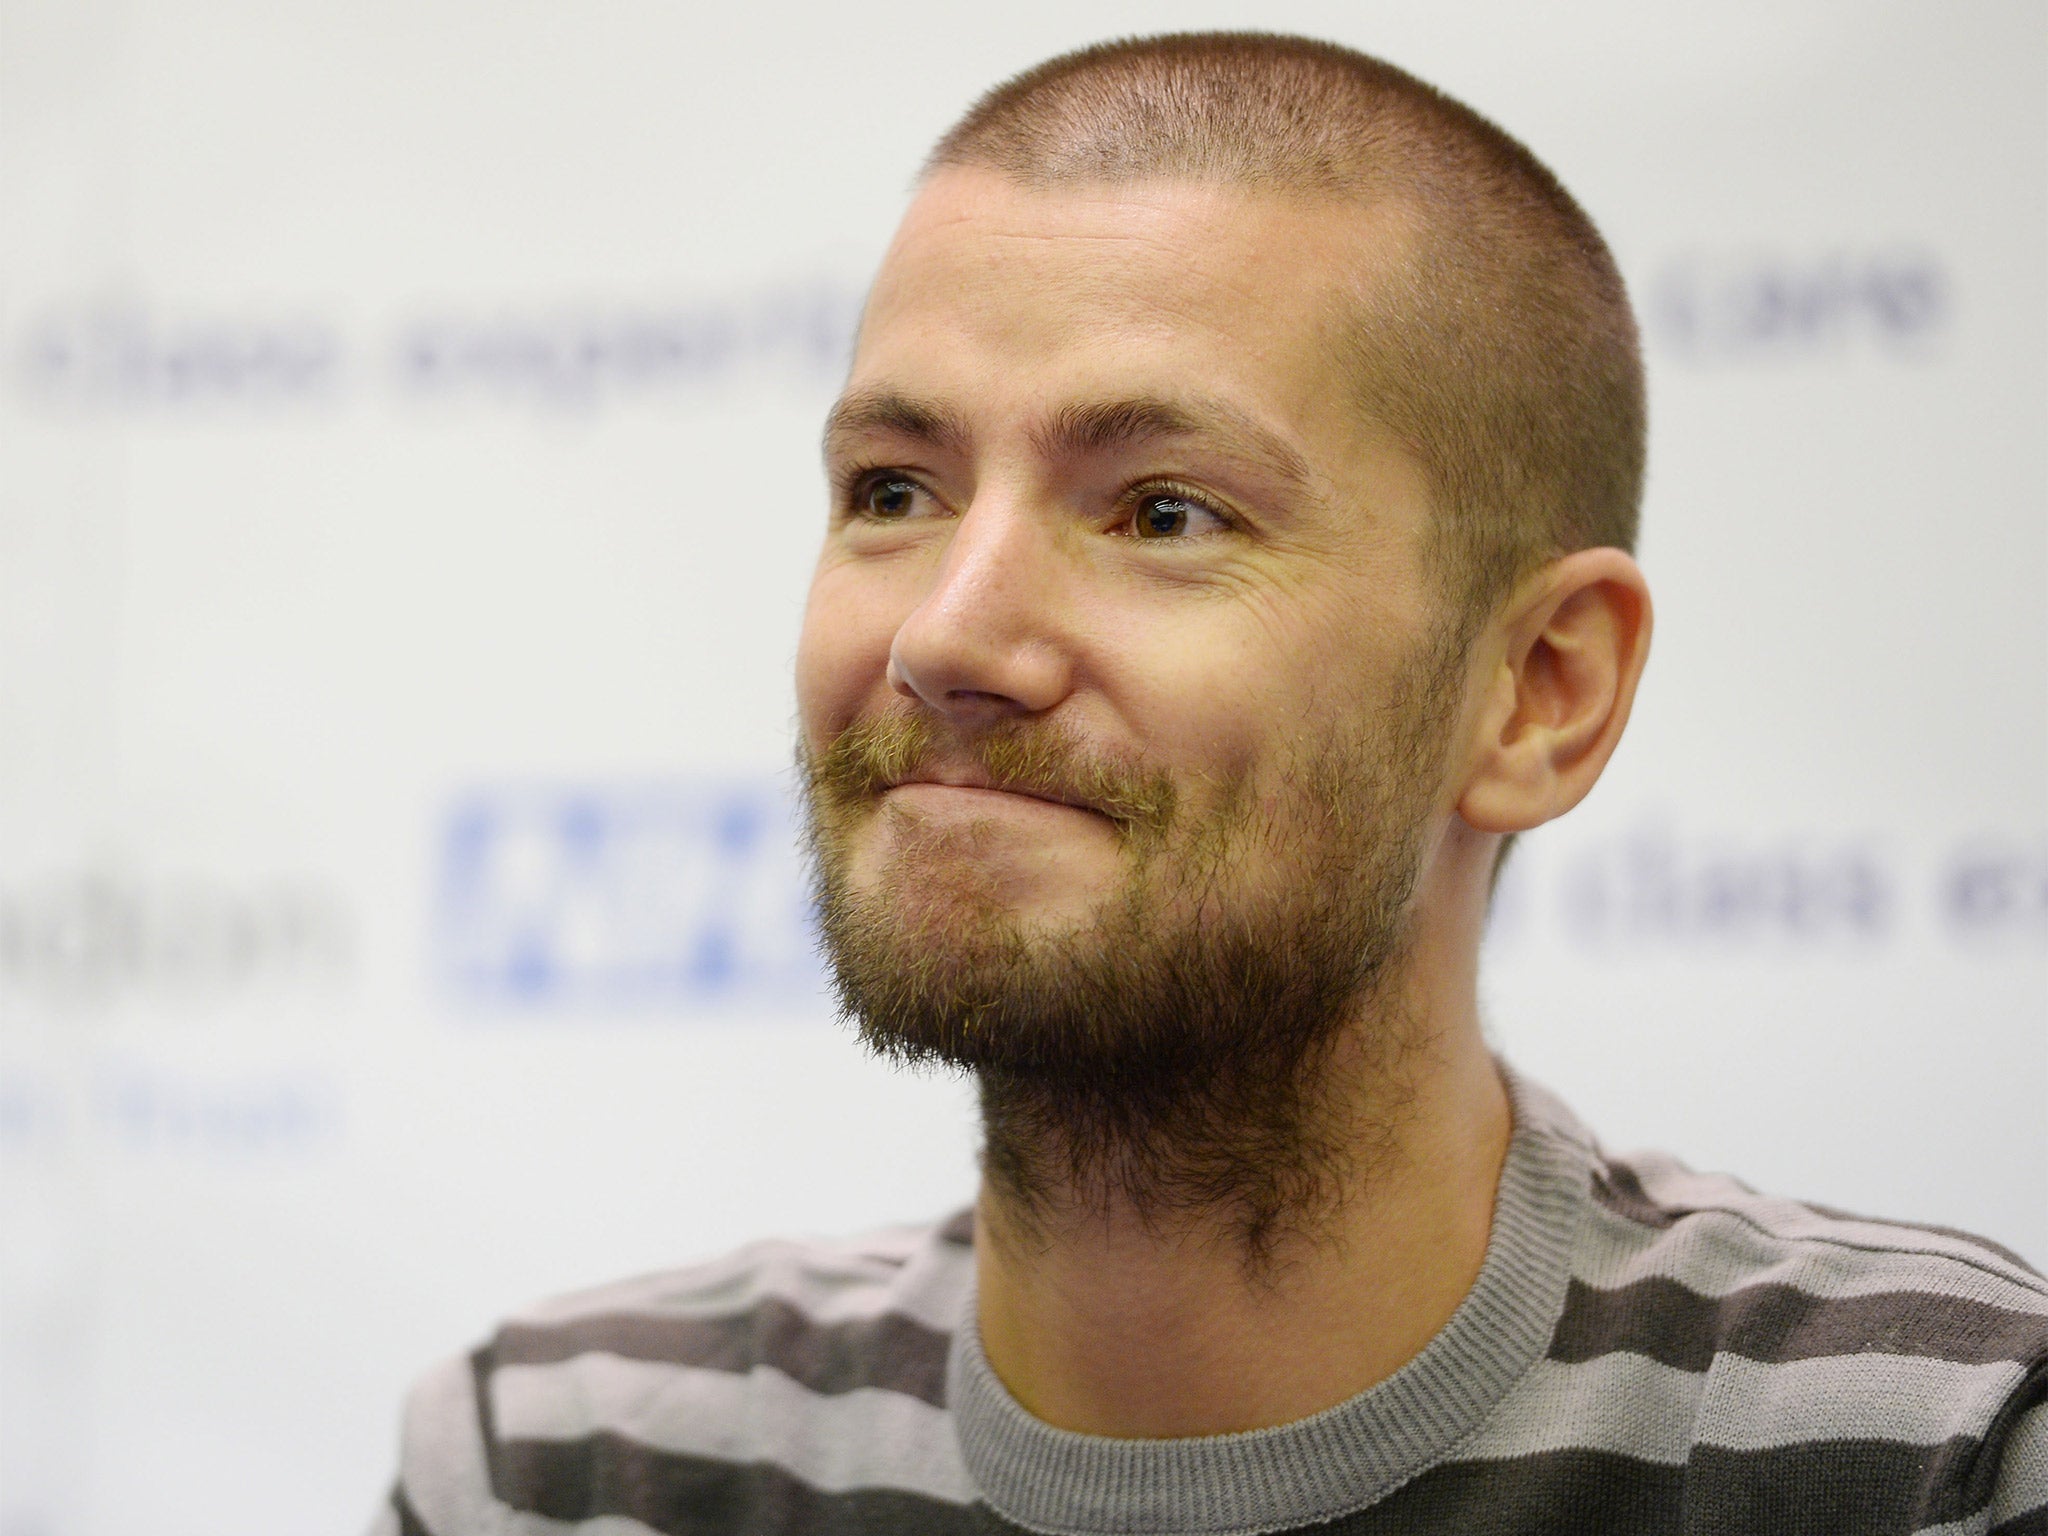 William Pooley, the British nurse who was cured of the Ebola, has been flown to America on a life-saving mission